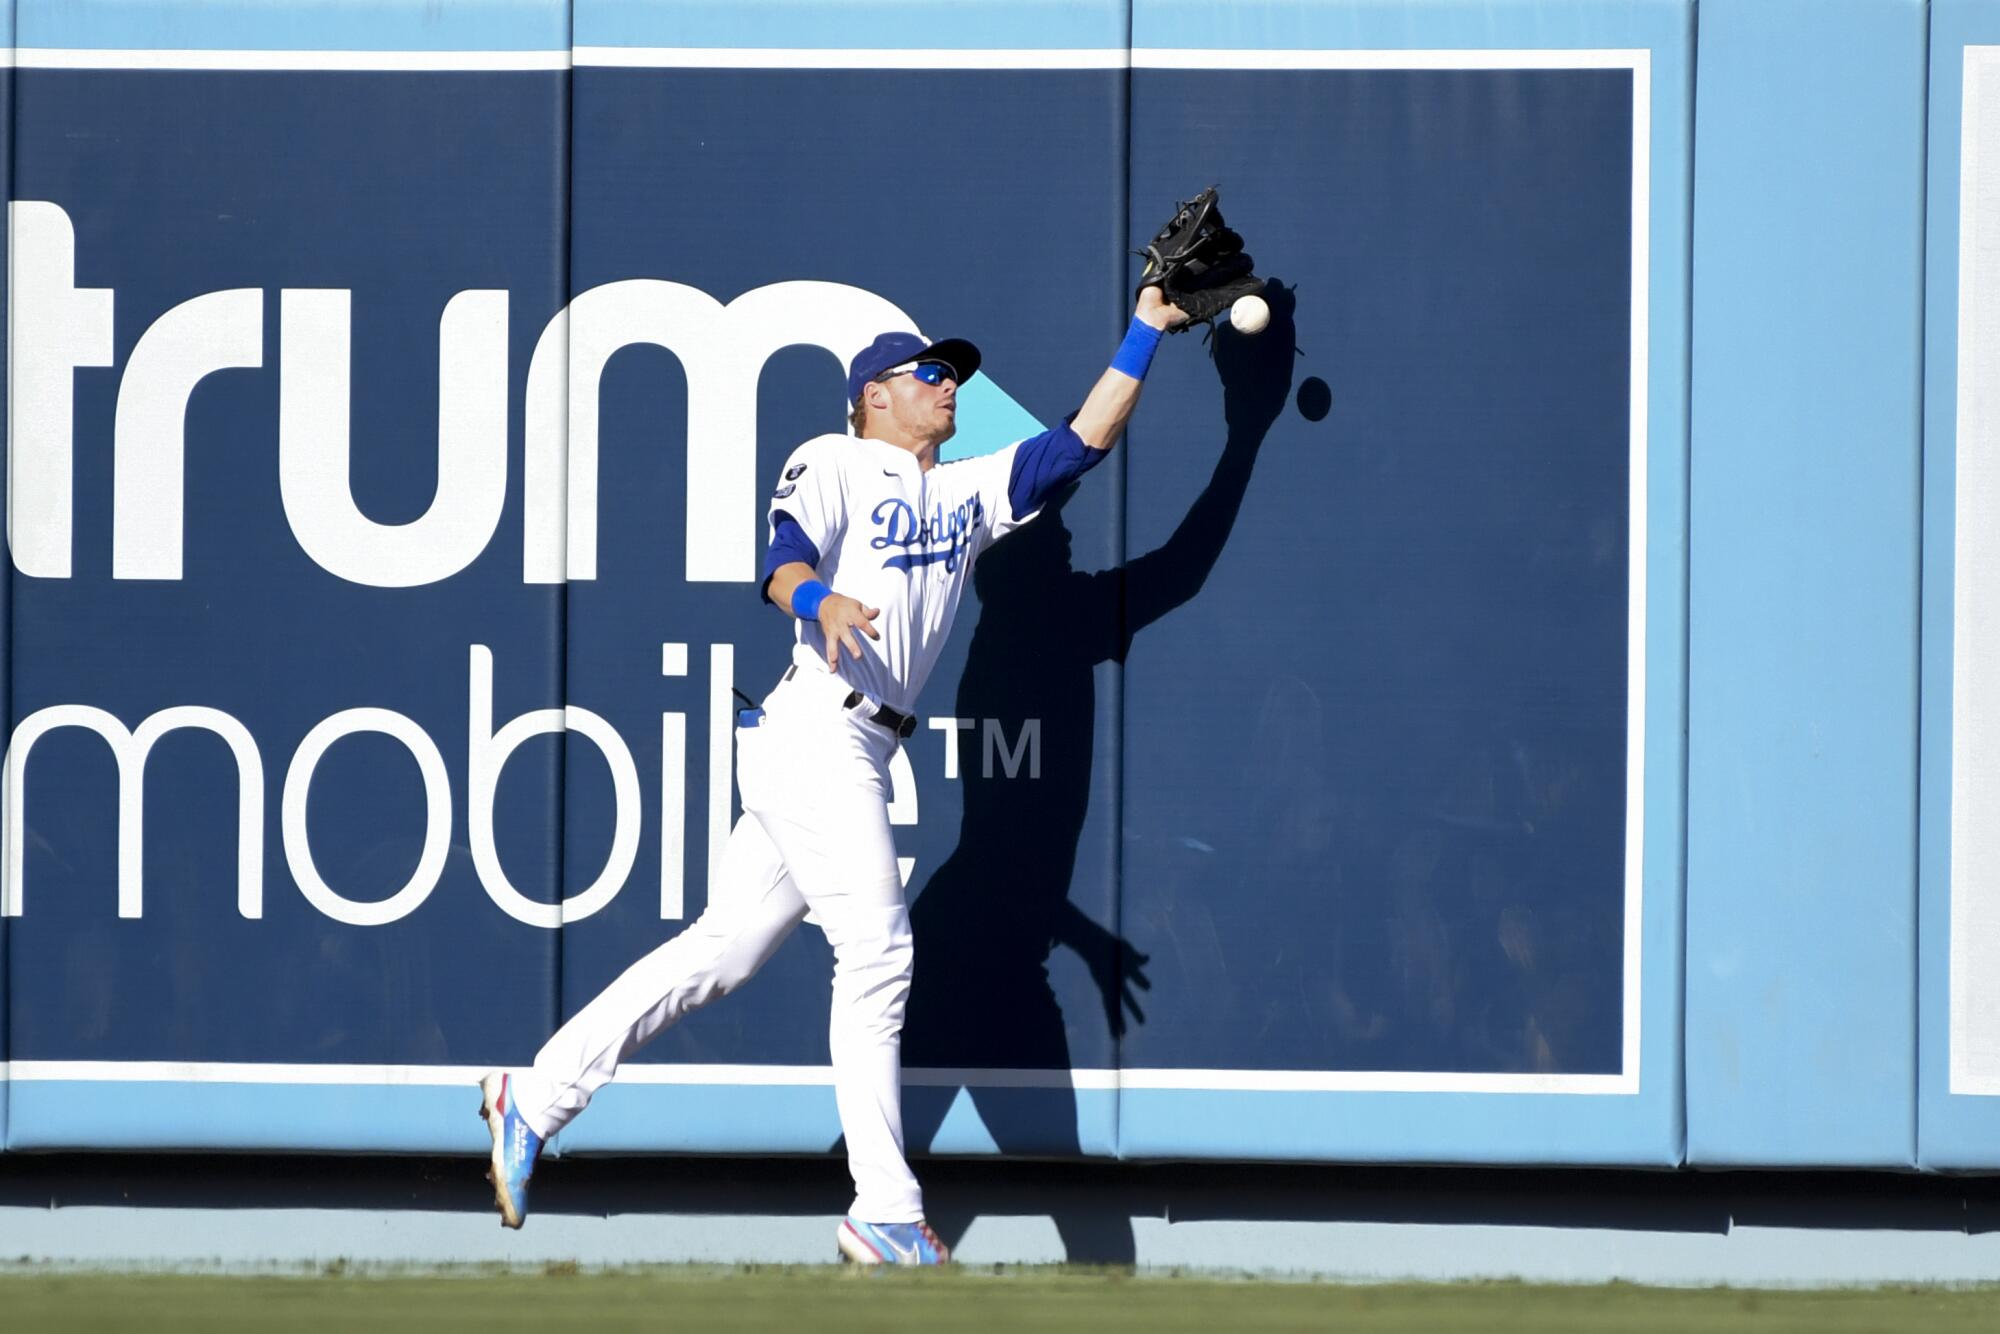 Dodgers' center fielder Gavin Lux is unable to catch a fly ball hit by Atlanta Braves' Austin Riley during the third inning.